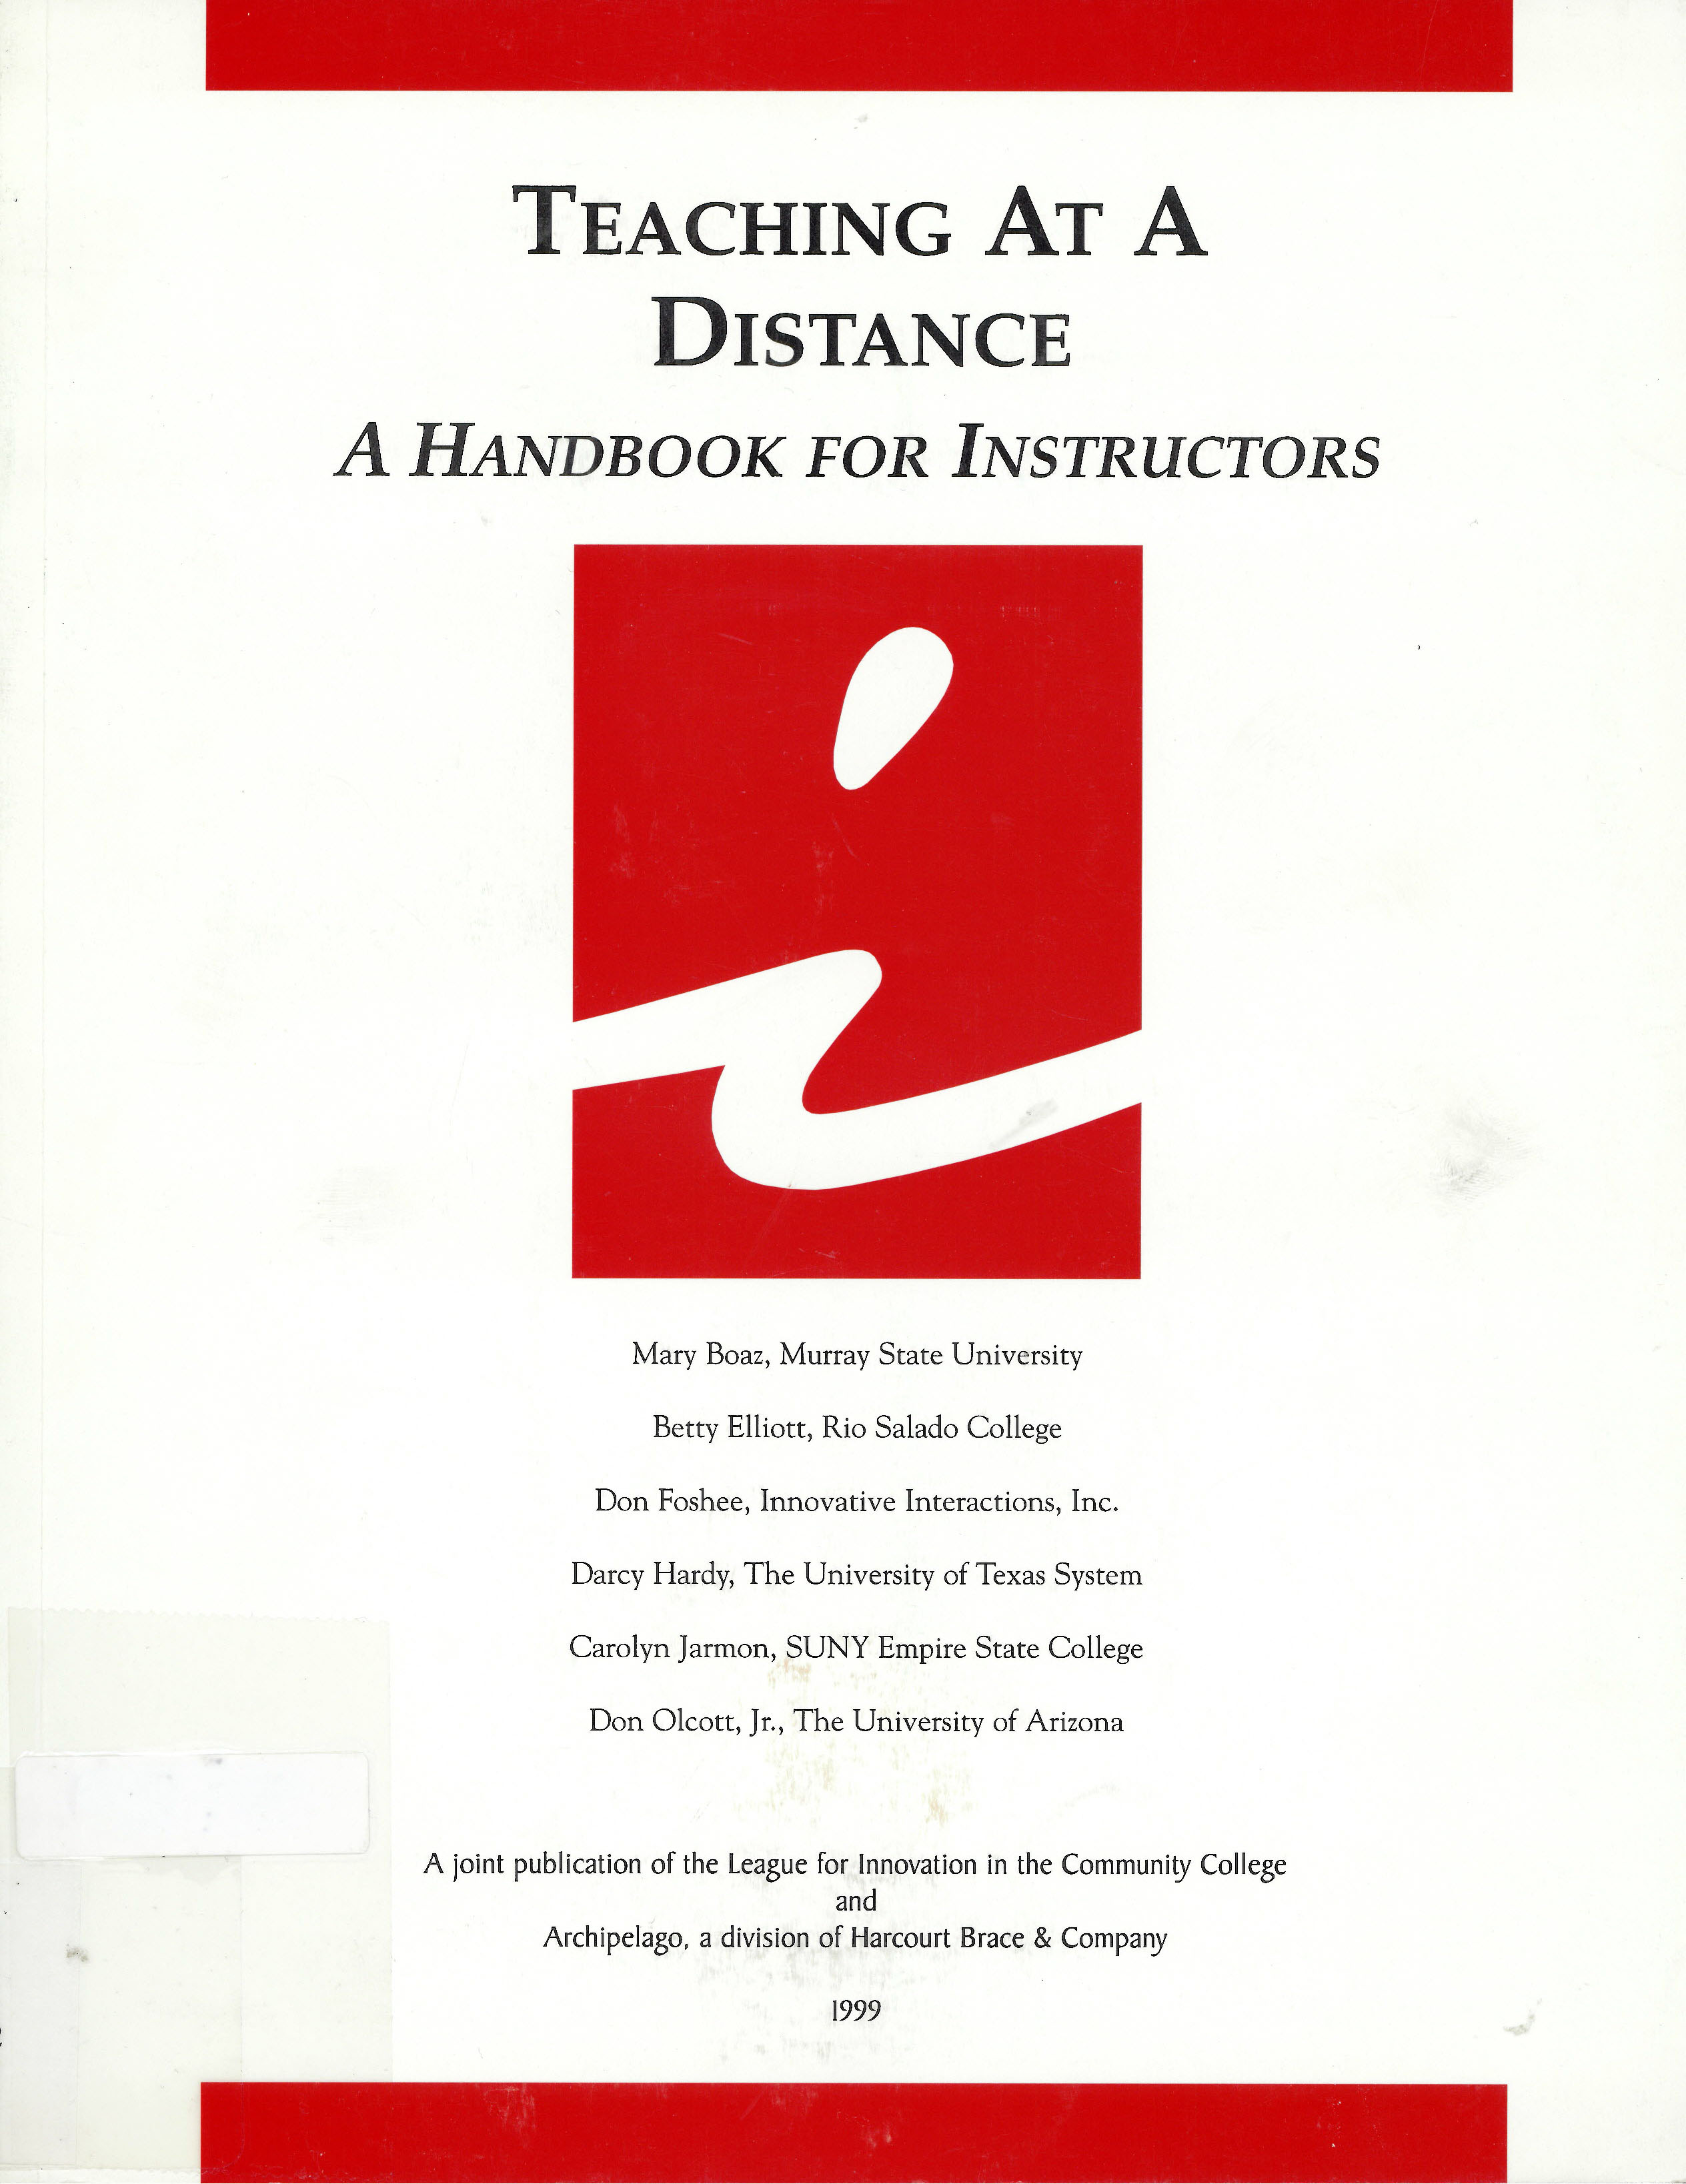 Teaching at a distance : a handbook for instructors